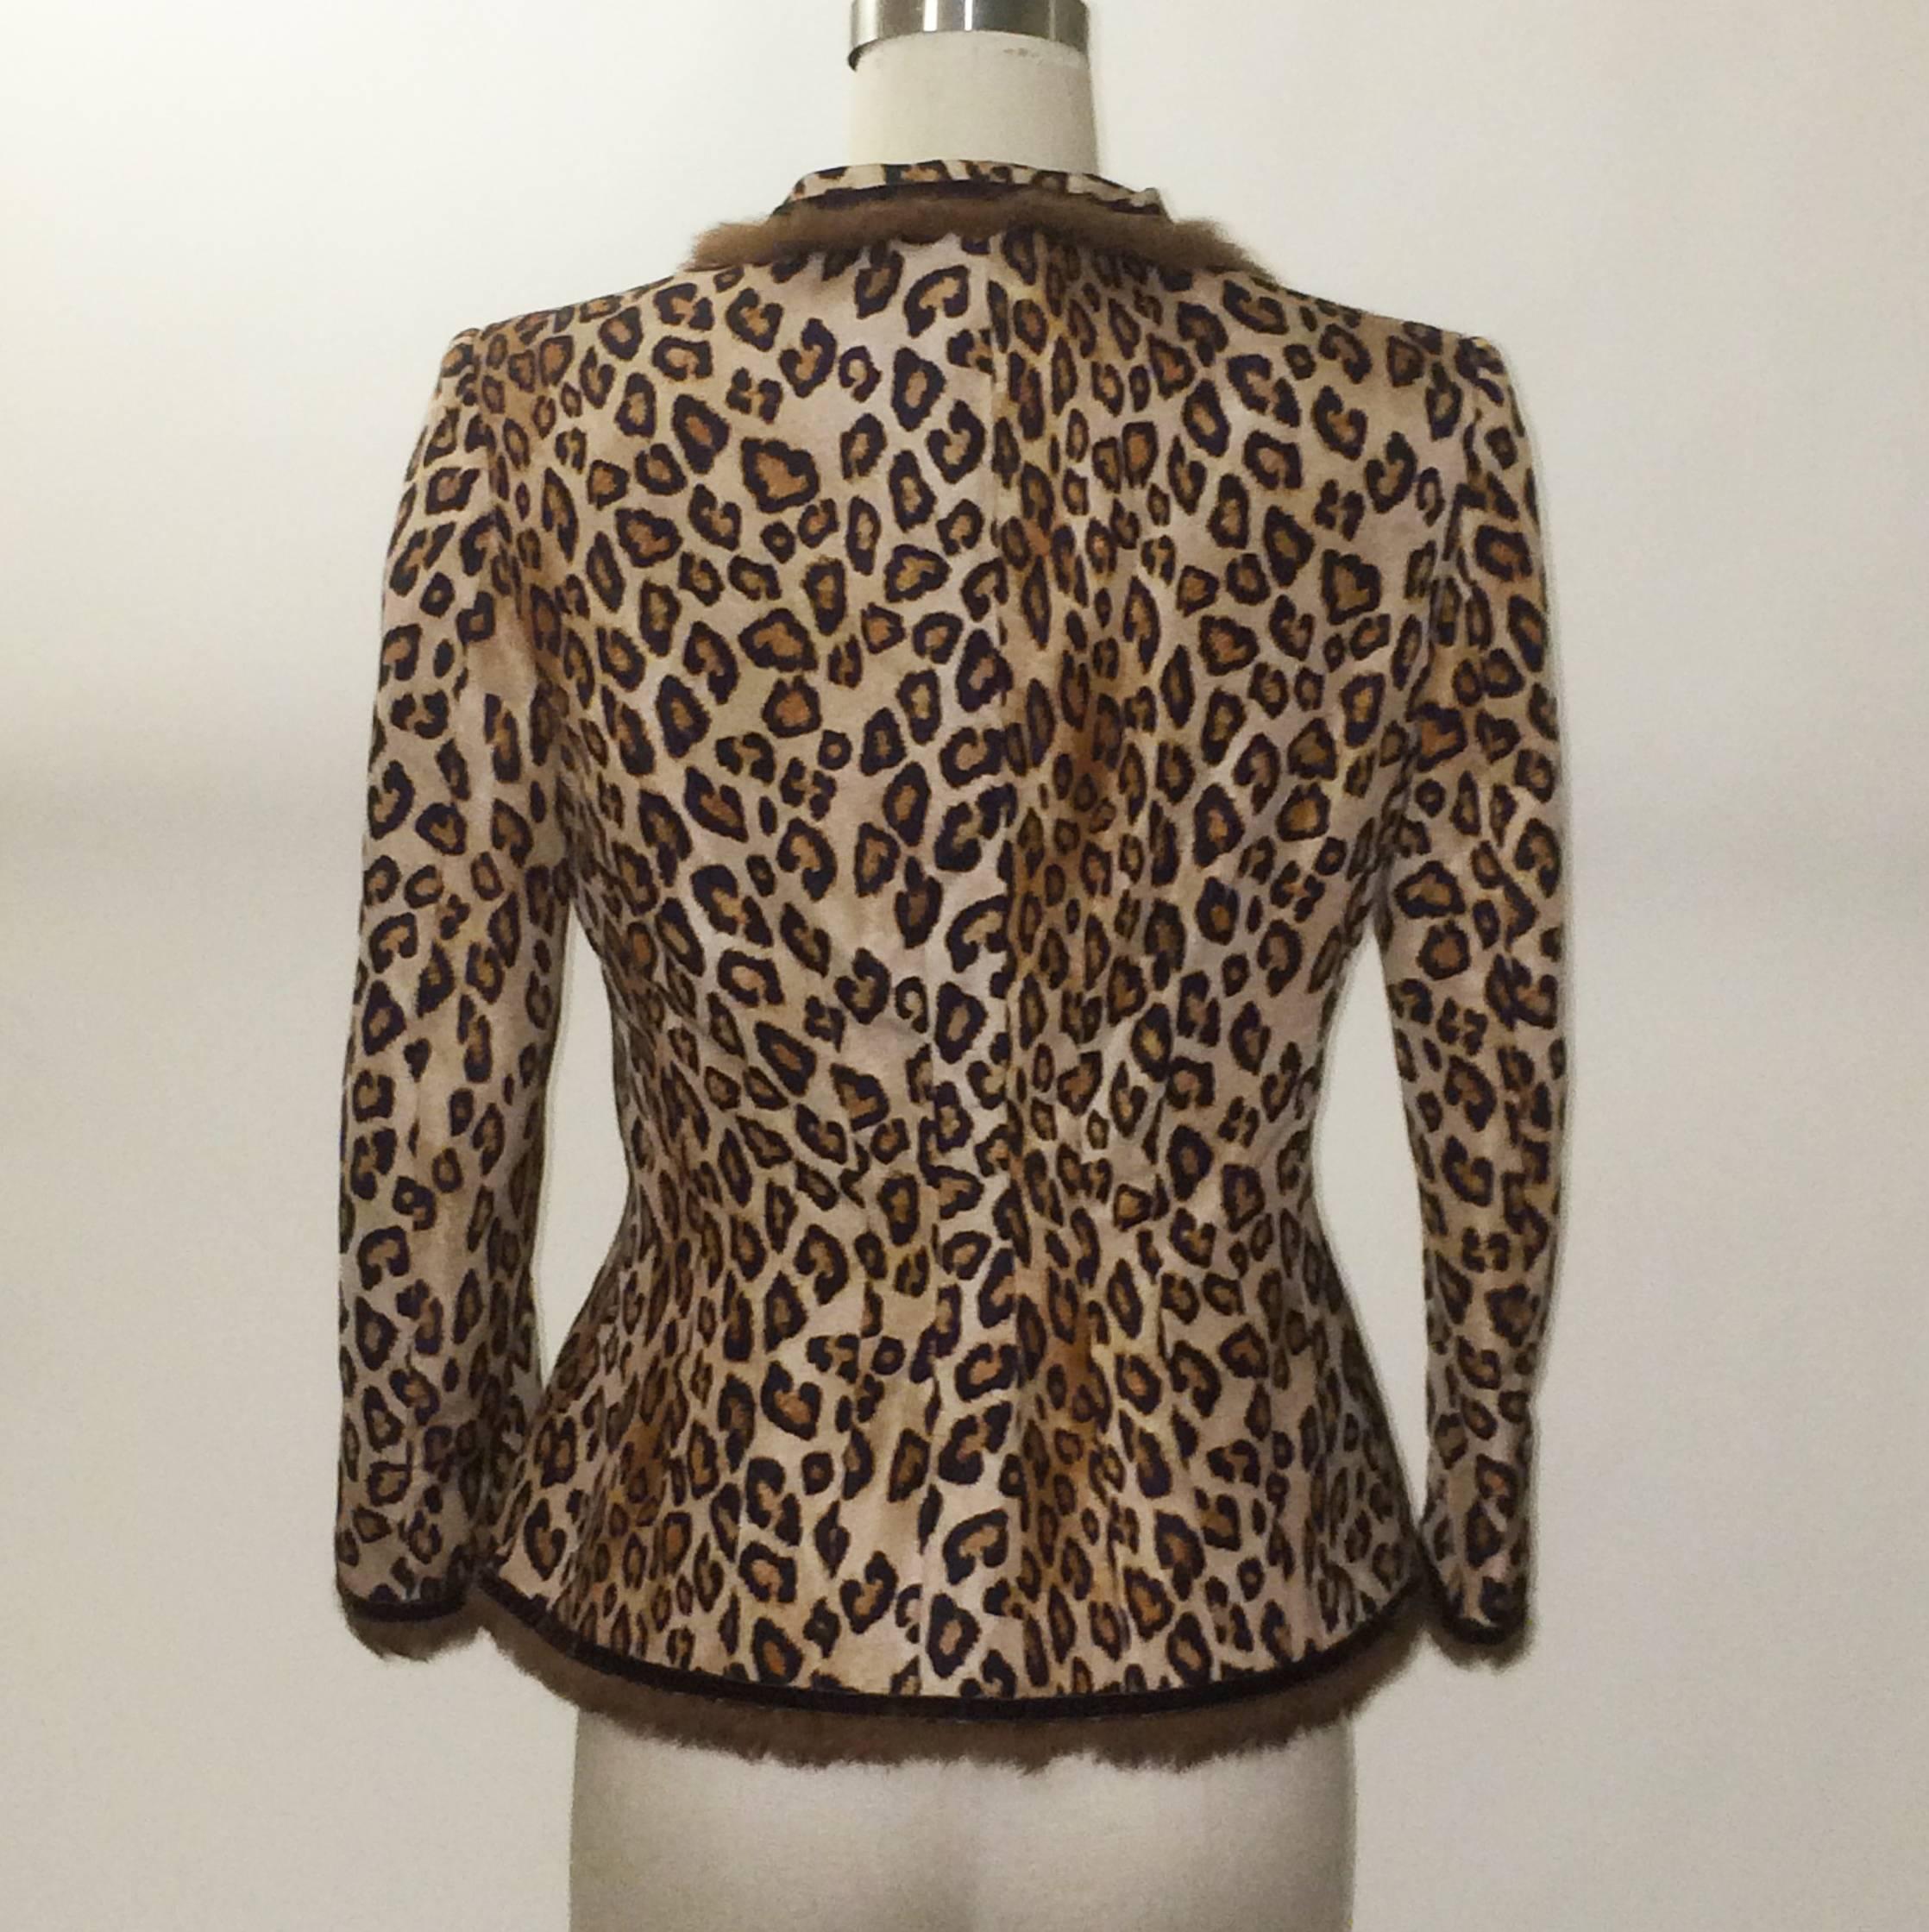 Alexander McQueen leopard print jacket from the 2005 Hitchcock inspired collection 'The Man Who Knew Too Much.' Concealed cloth covered snaps and hooks at front.

100% silk.
Trimmed in 100% rabbit.
Fully lined in 74% acetate 26% silk.

Made in